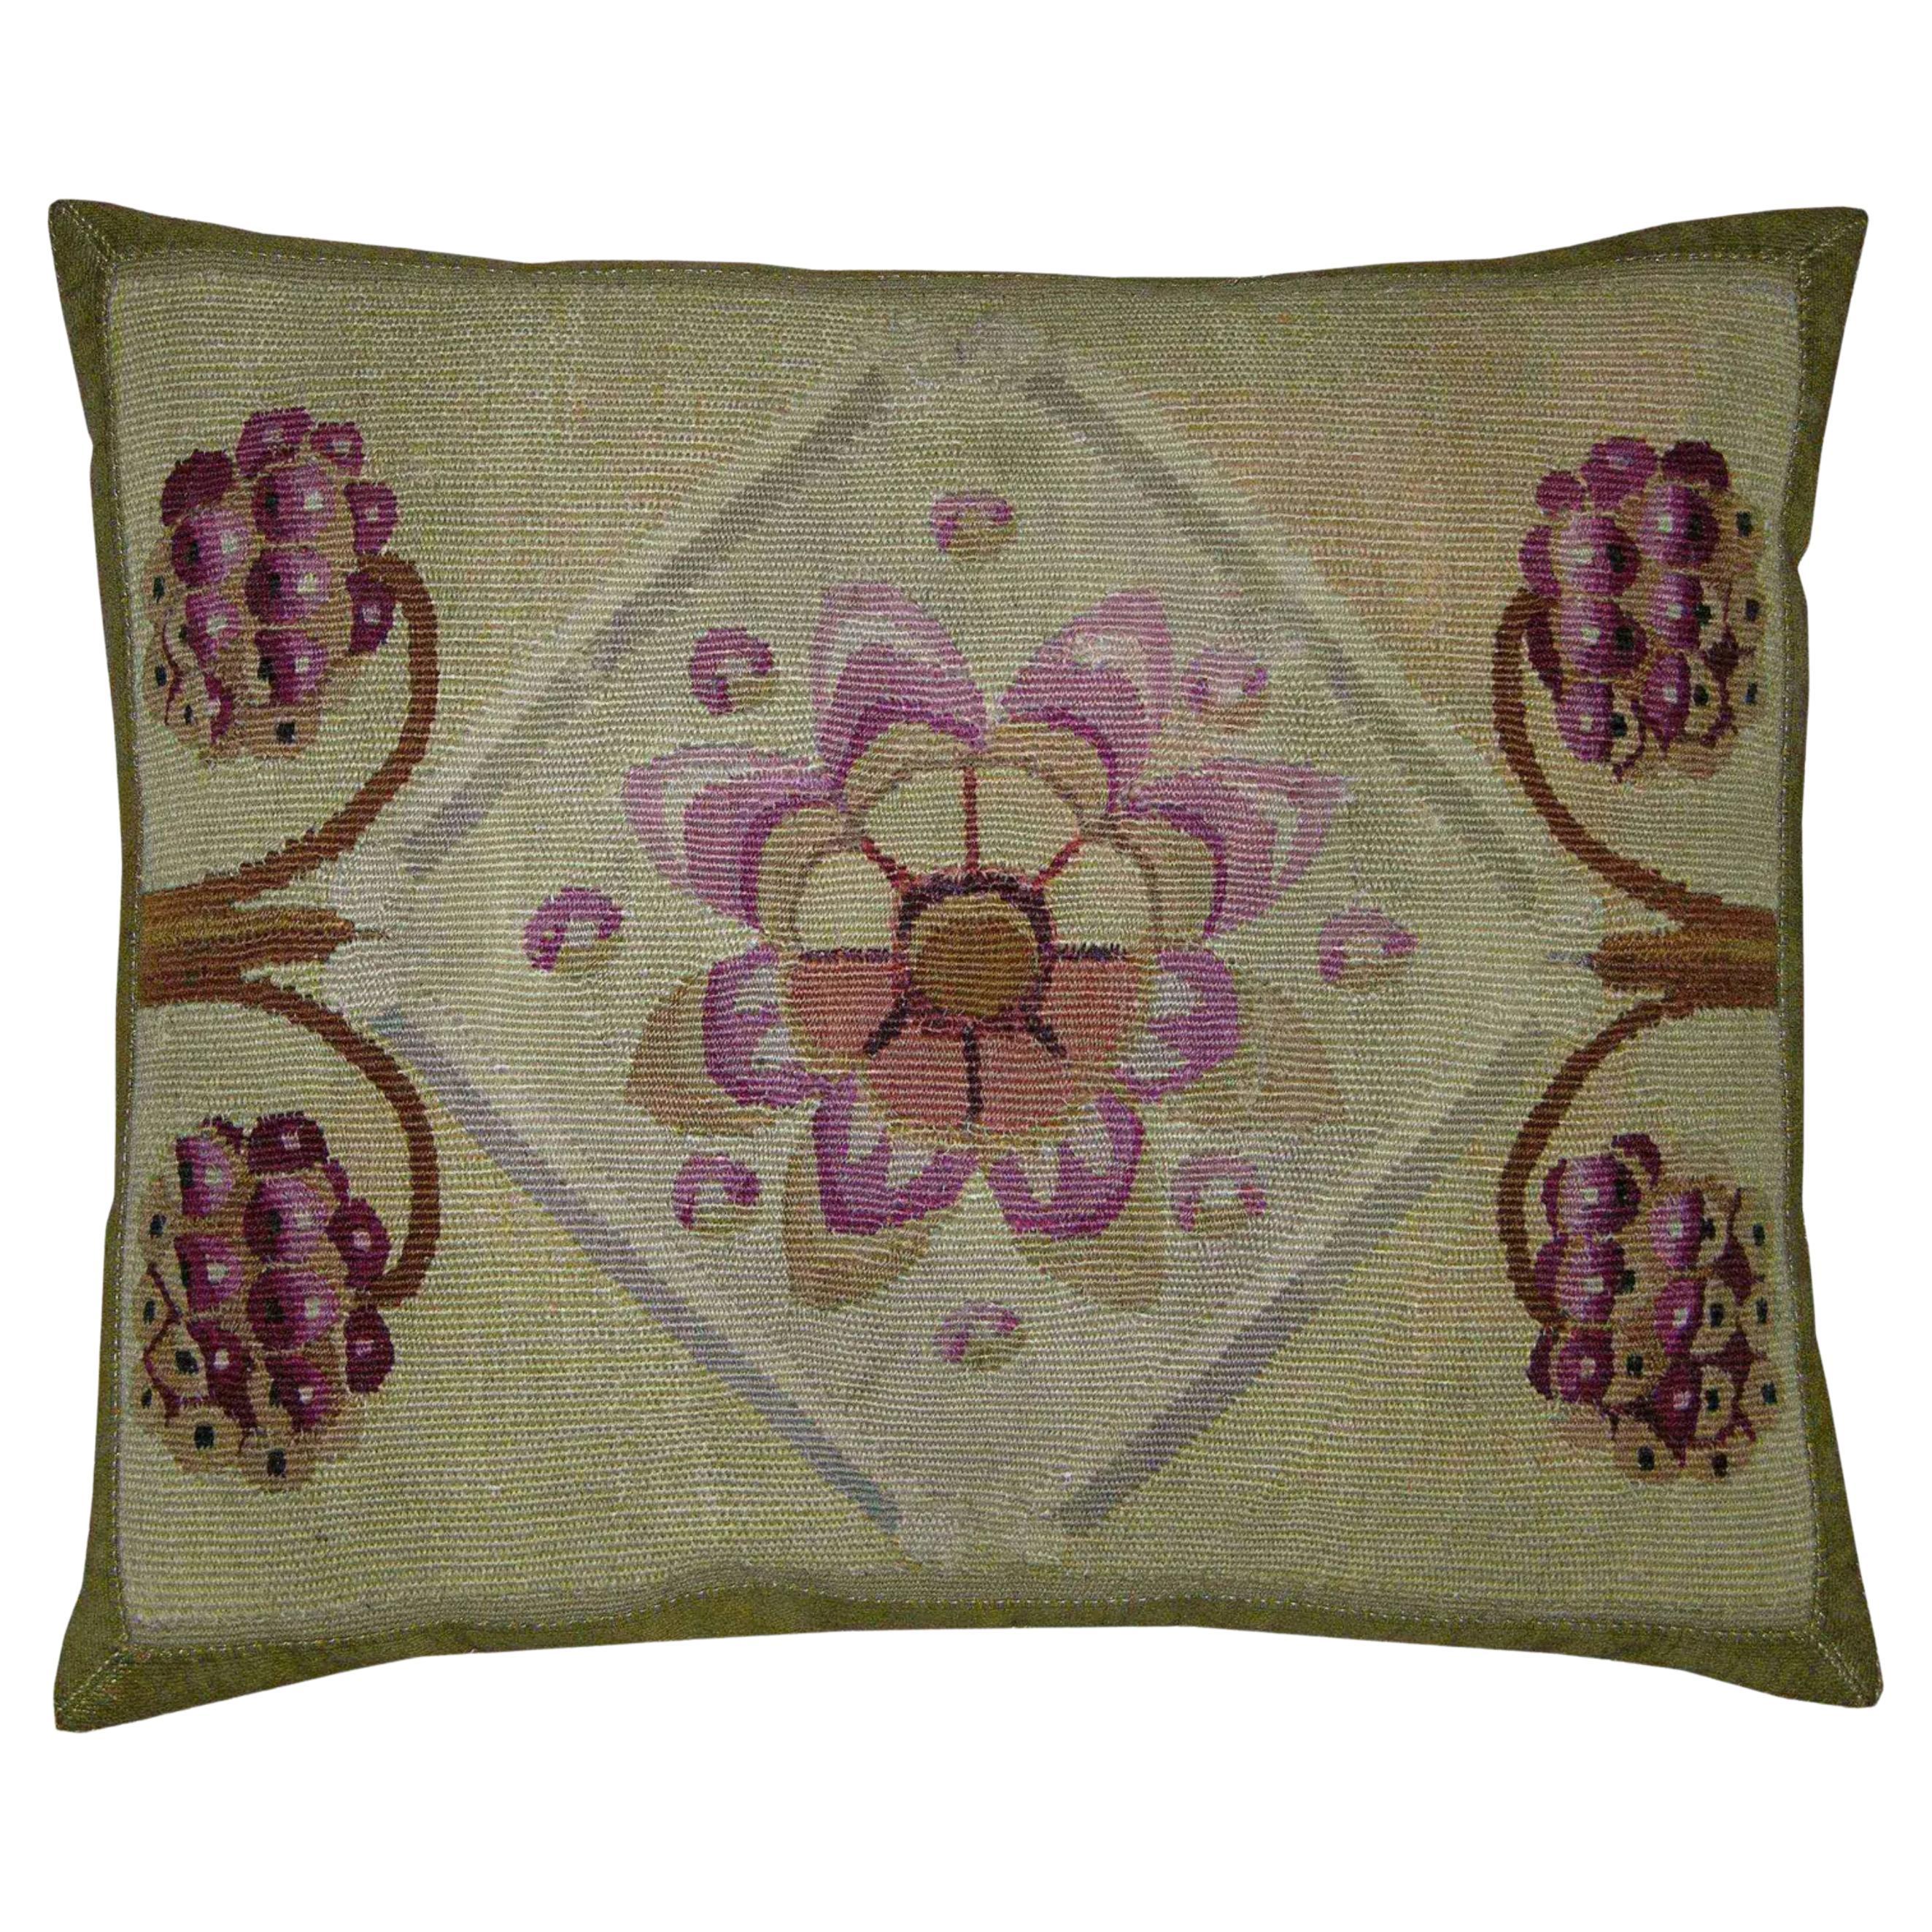 Circa 1850 Antique French Aubusson Pillow For Sale